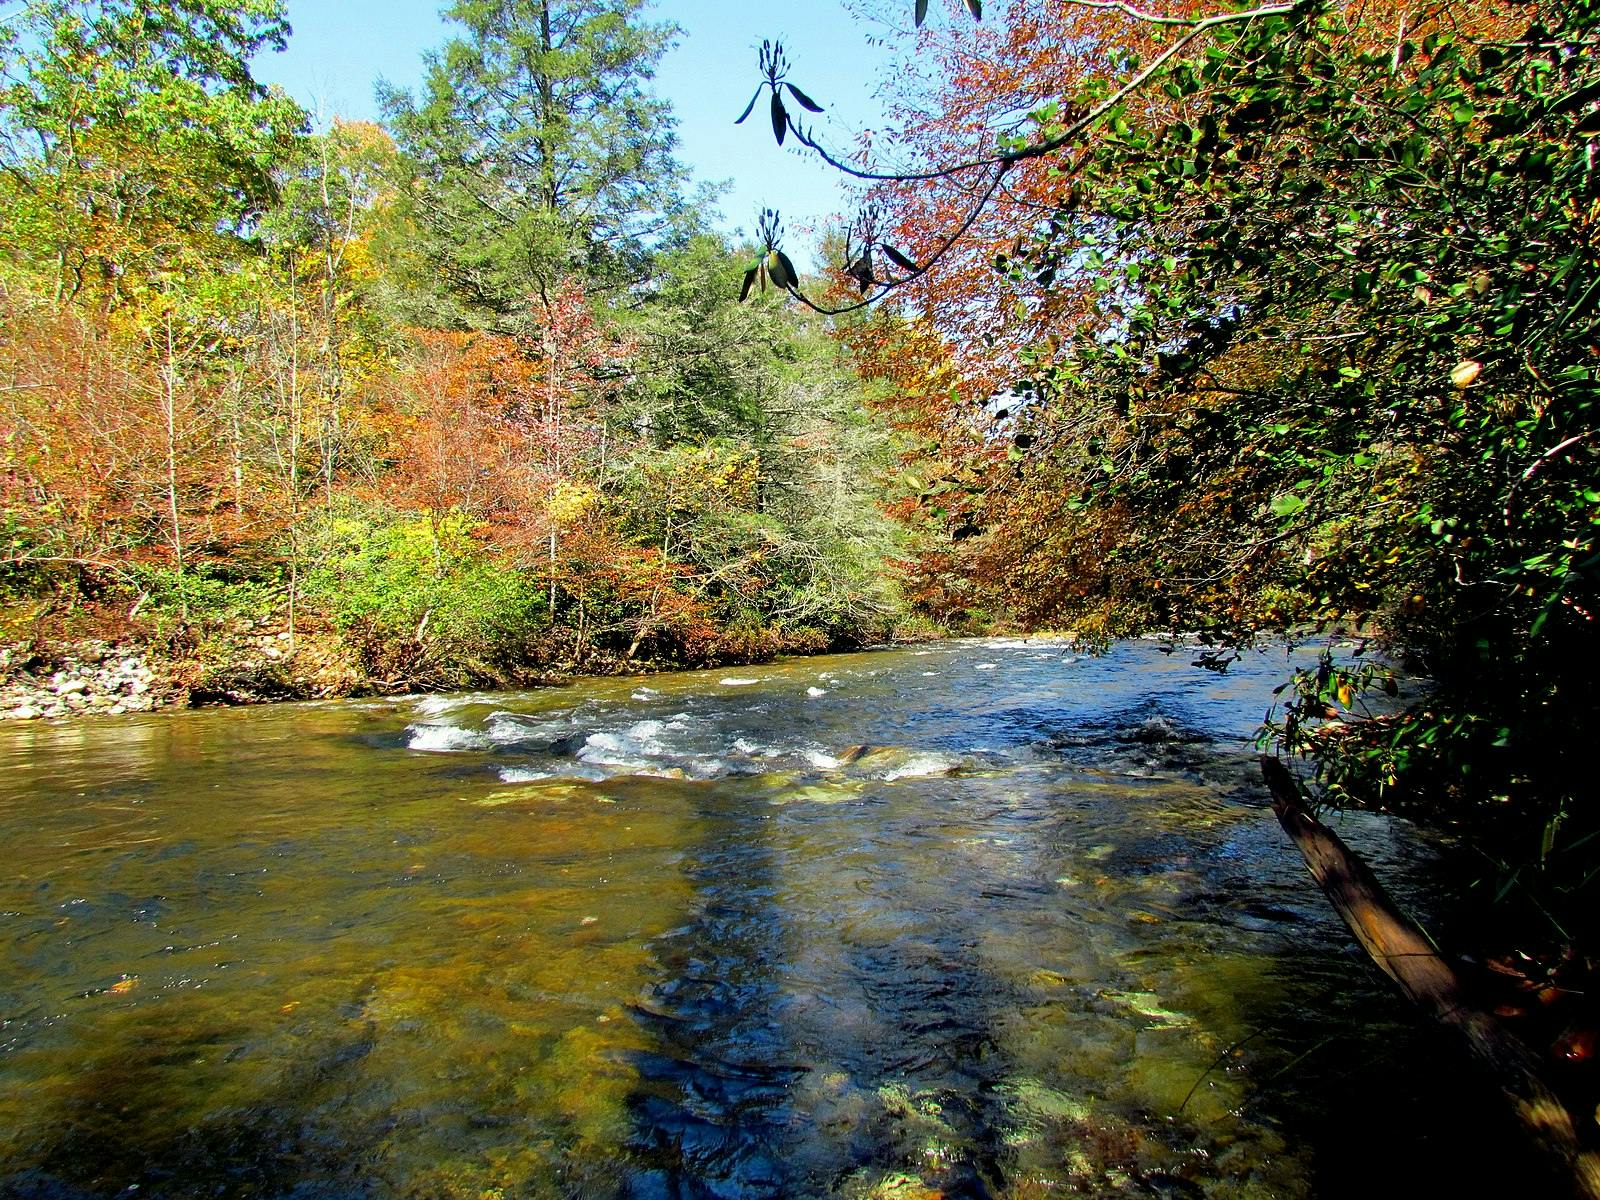 The South Toe River in autumn.